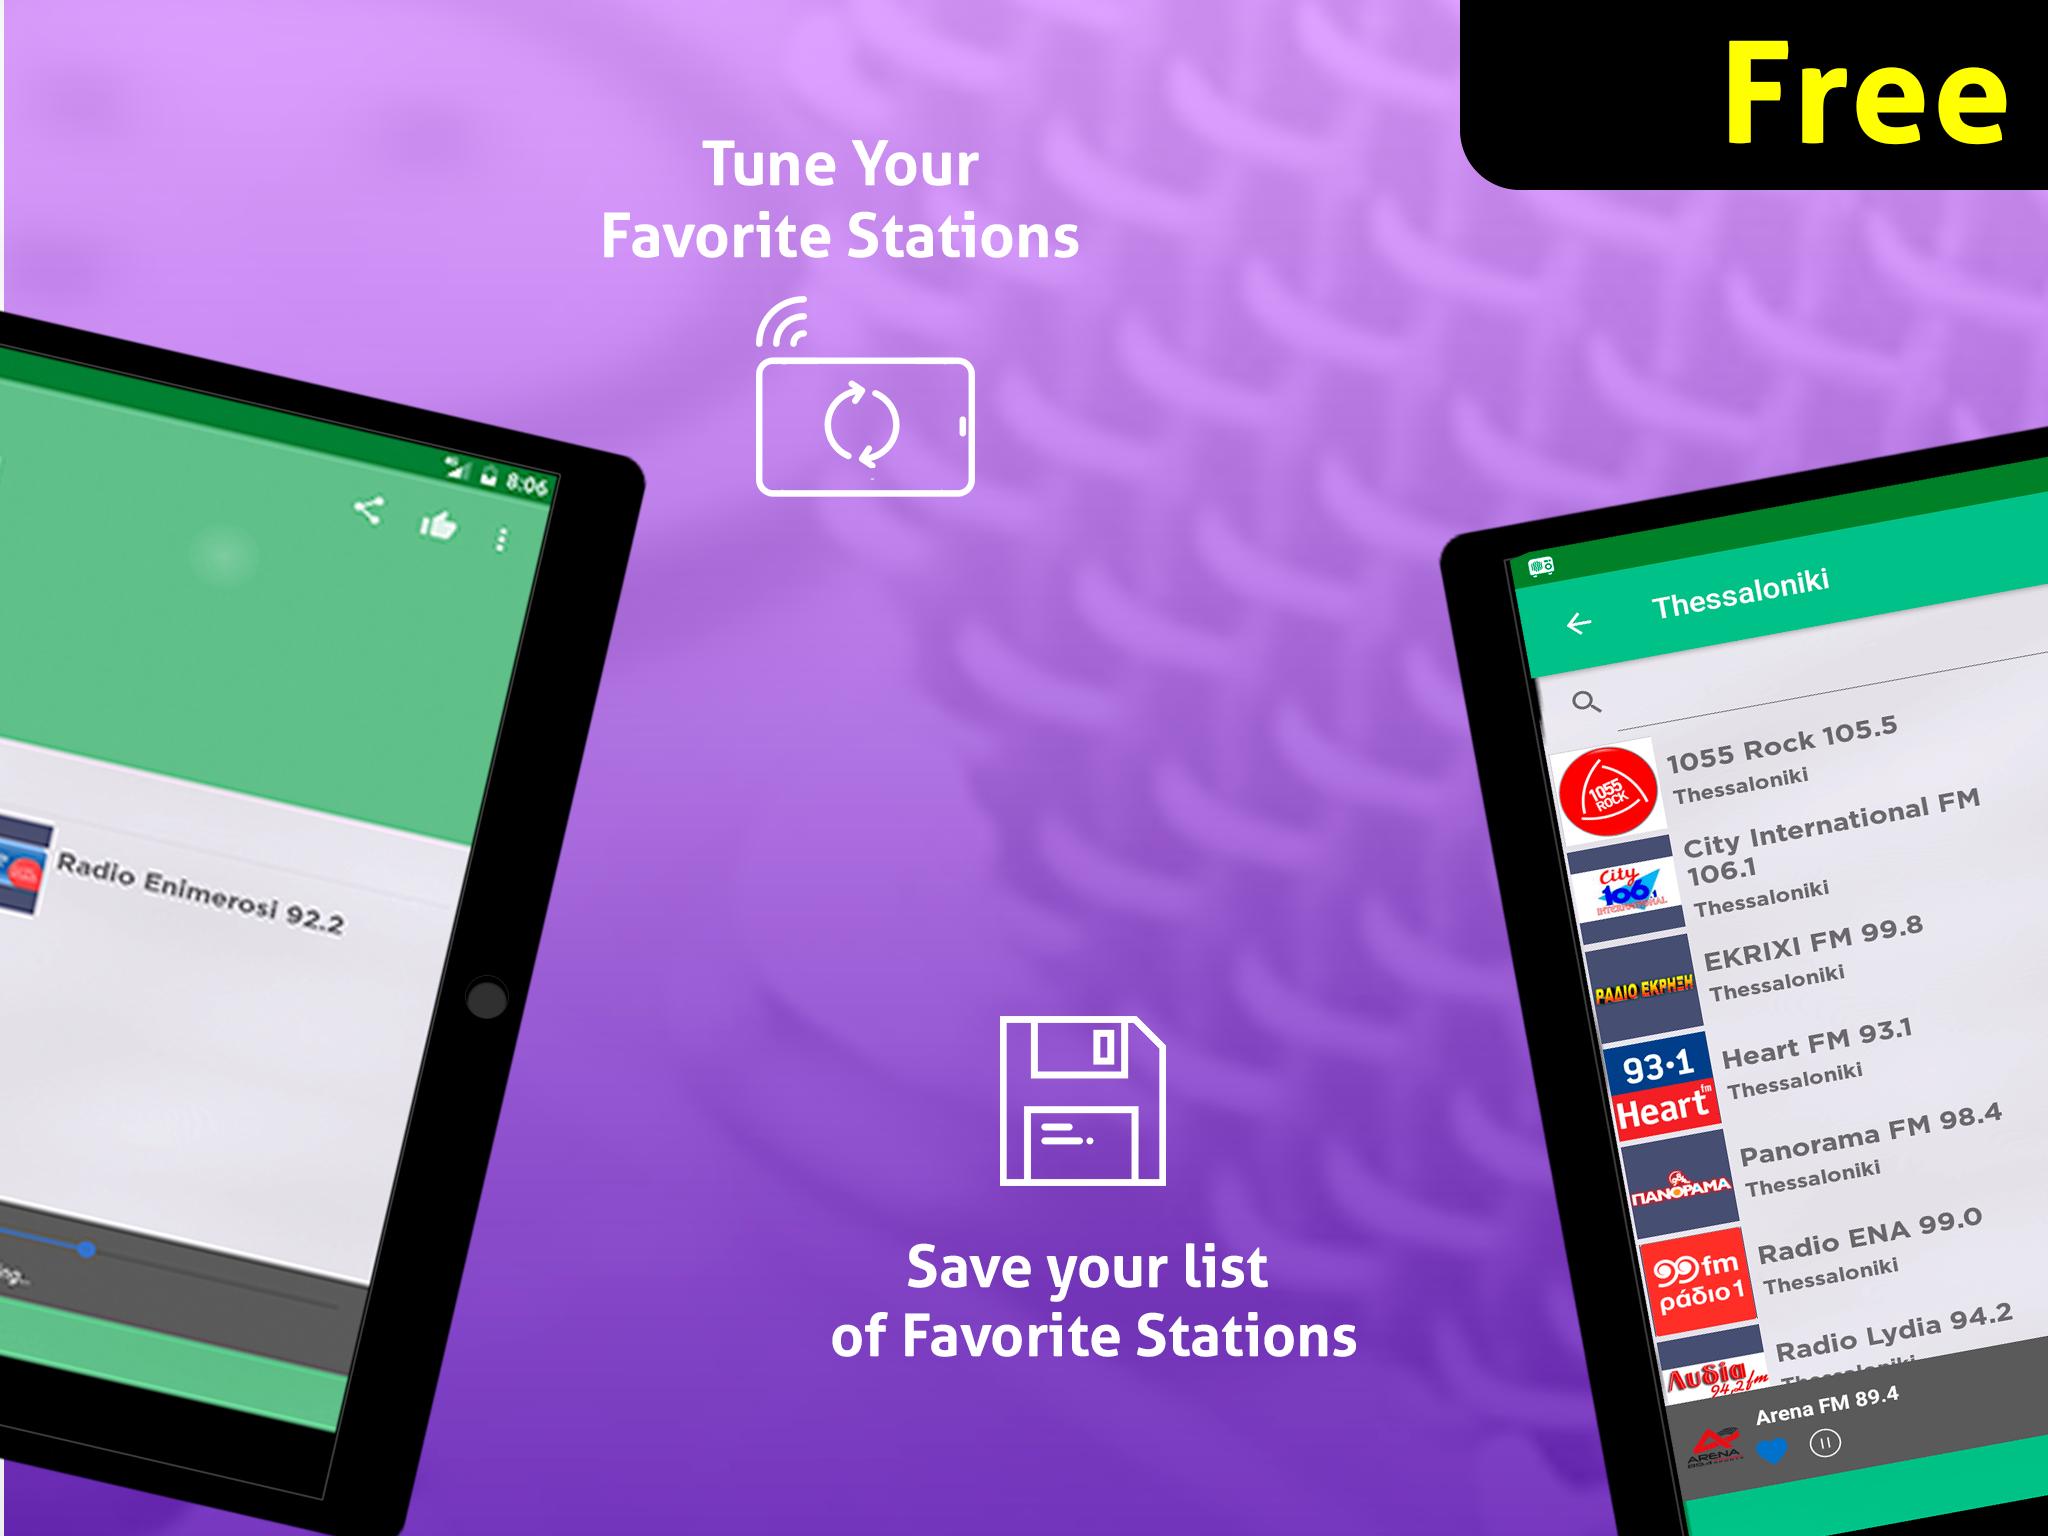 Free Greece Radio AM FM for Android - APK Download